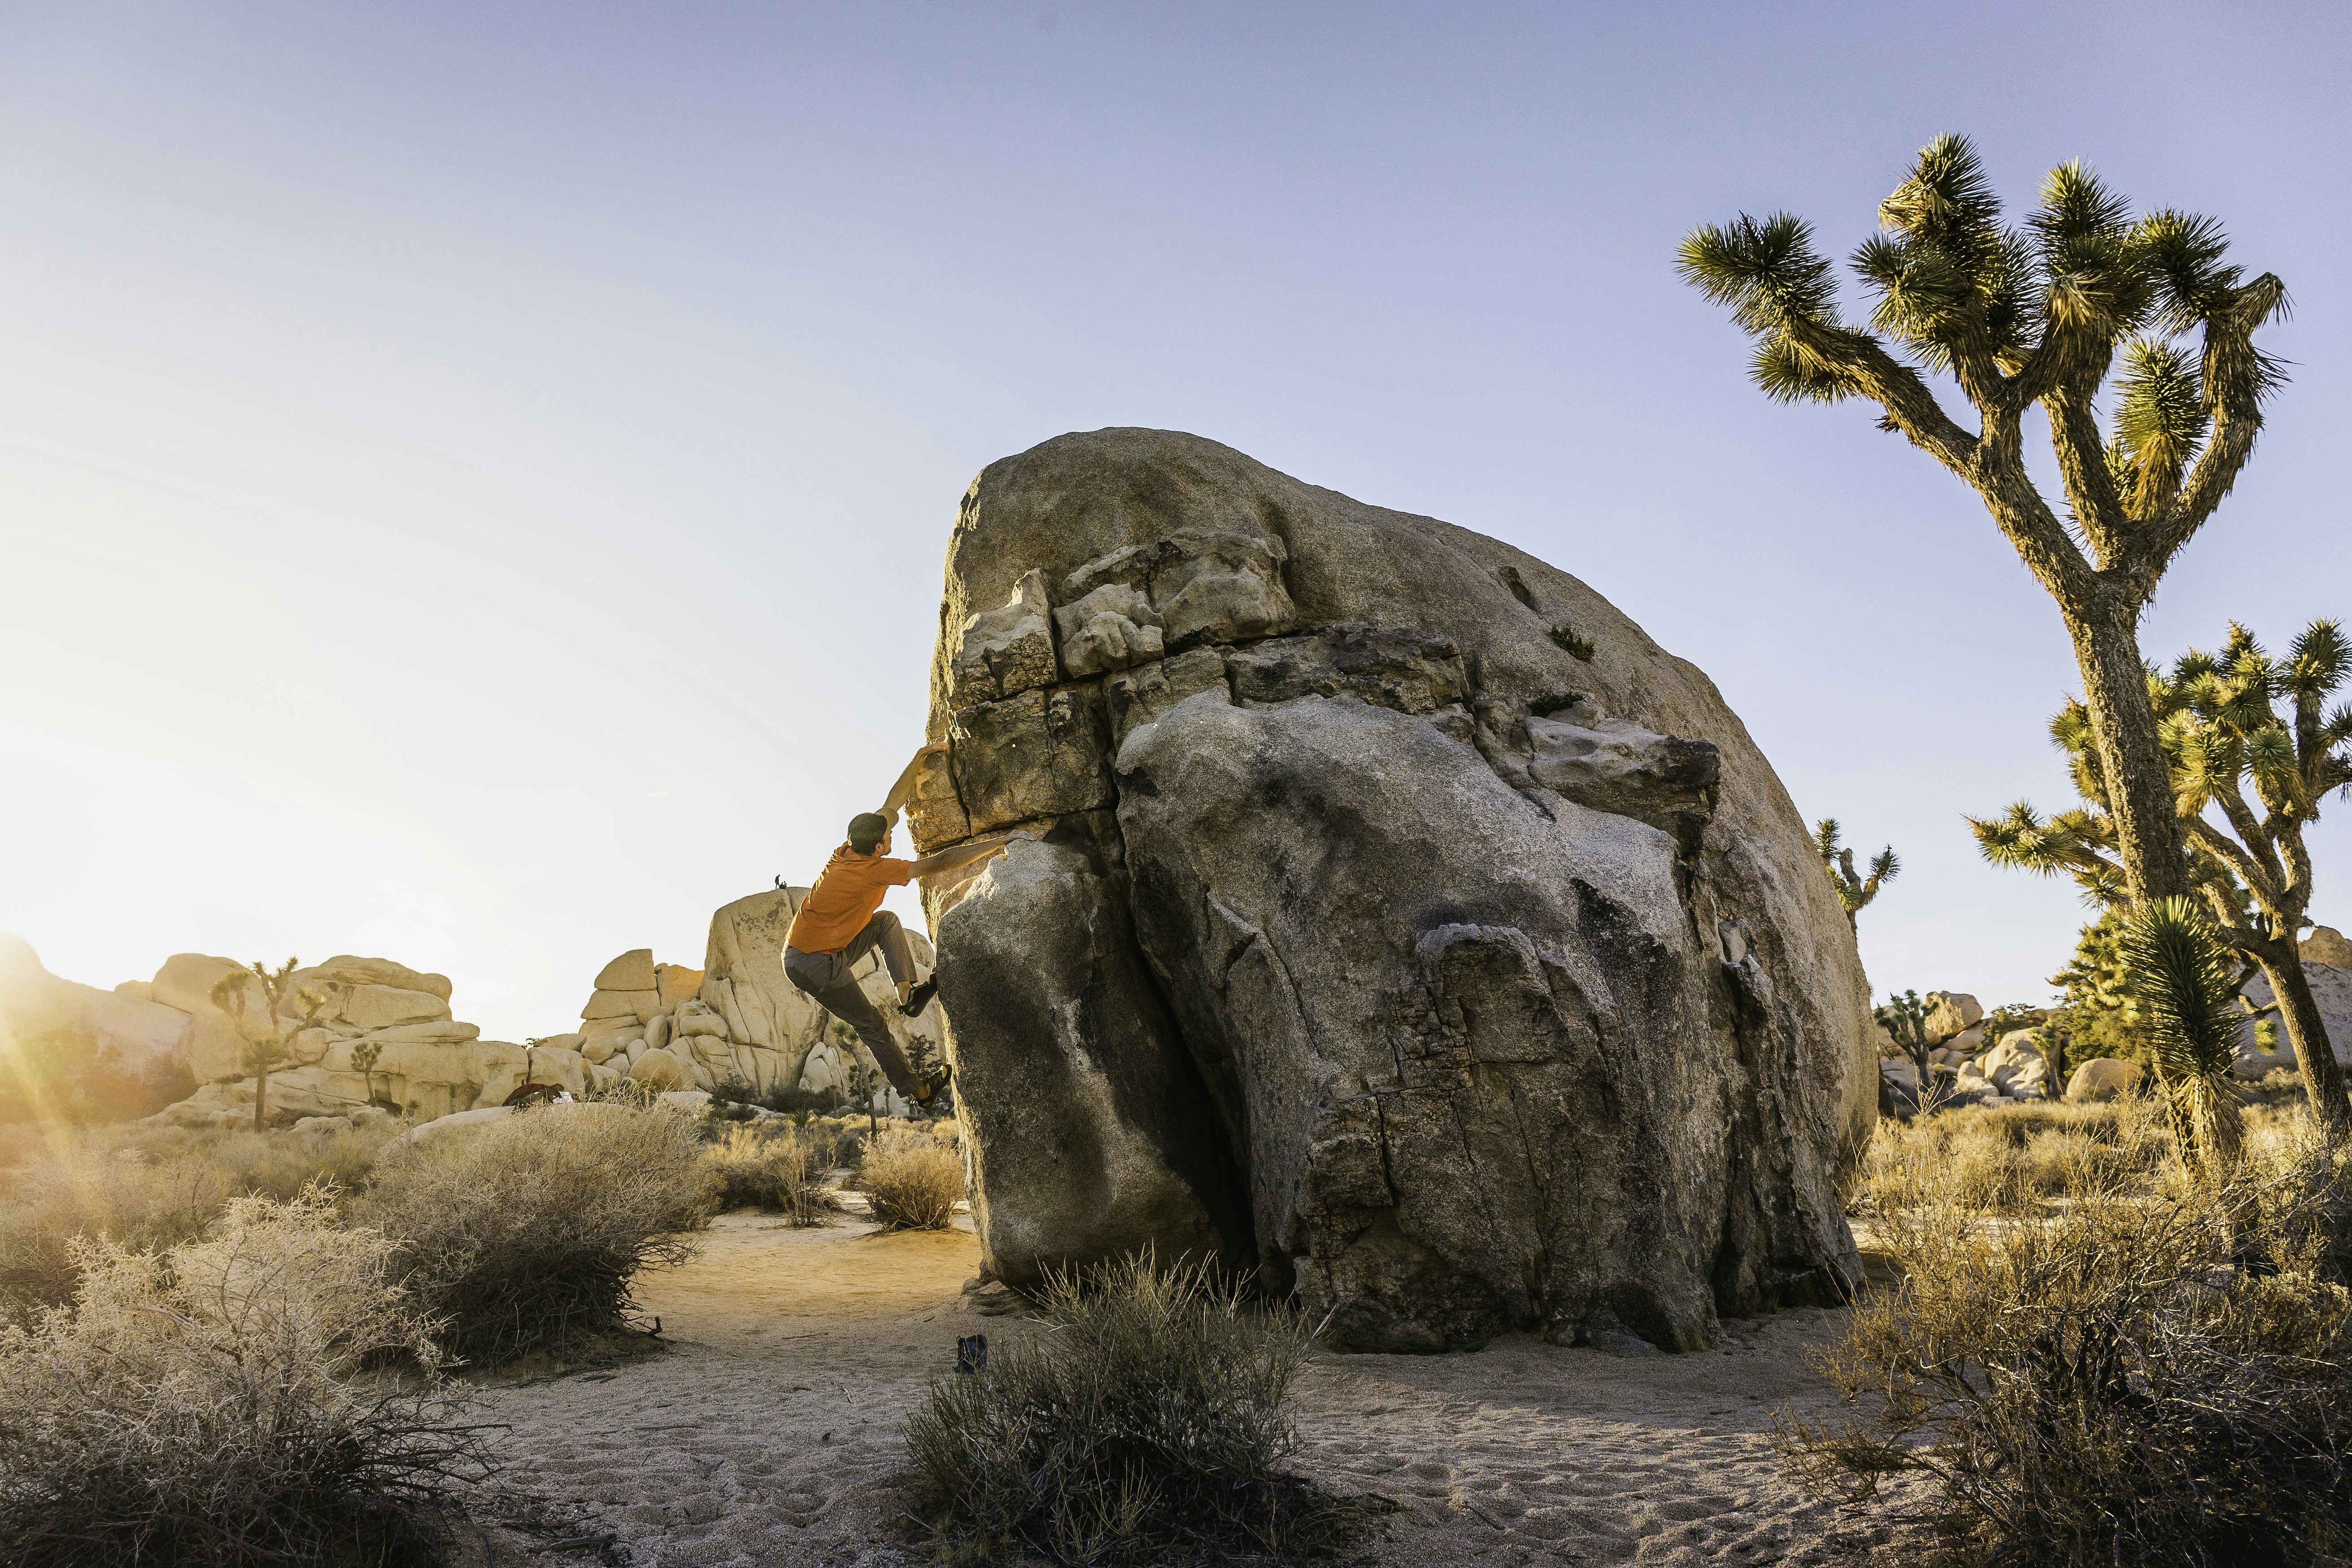 A man in olive shorts and a bright orange t-shirt climbs one of the large, rounded boulders that make up Jumbo Rocks in Joshua Tree National Park.